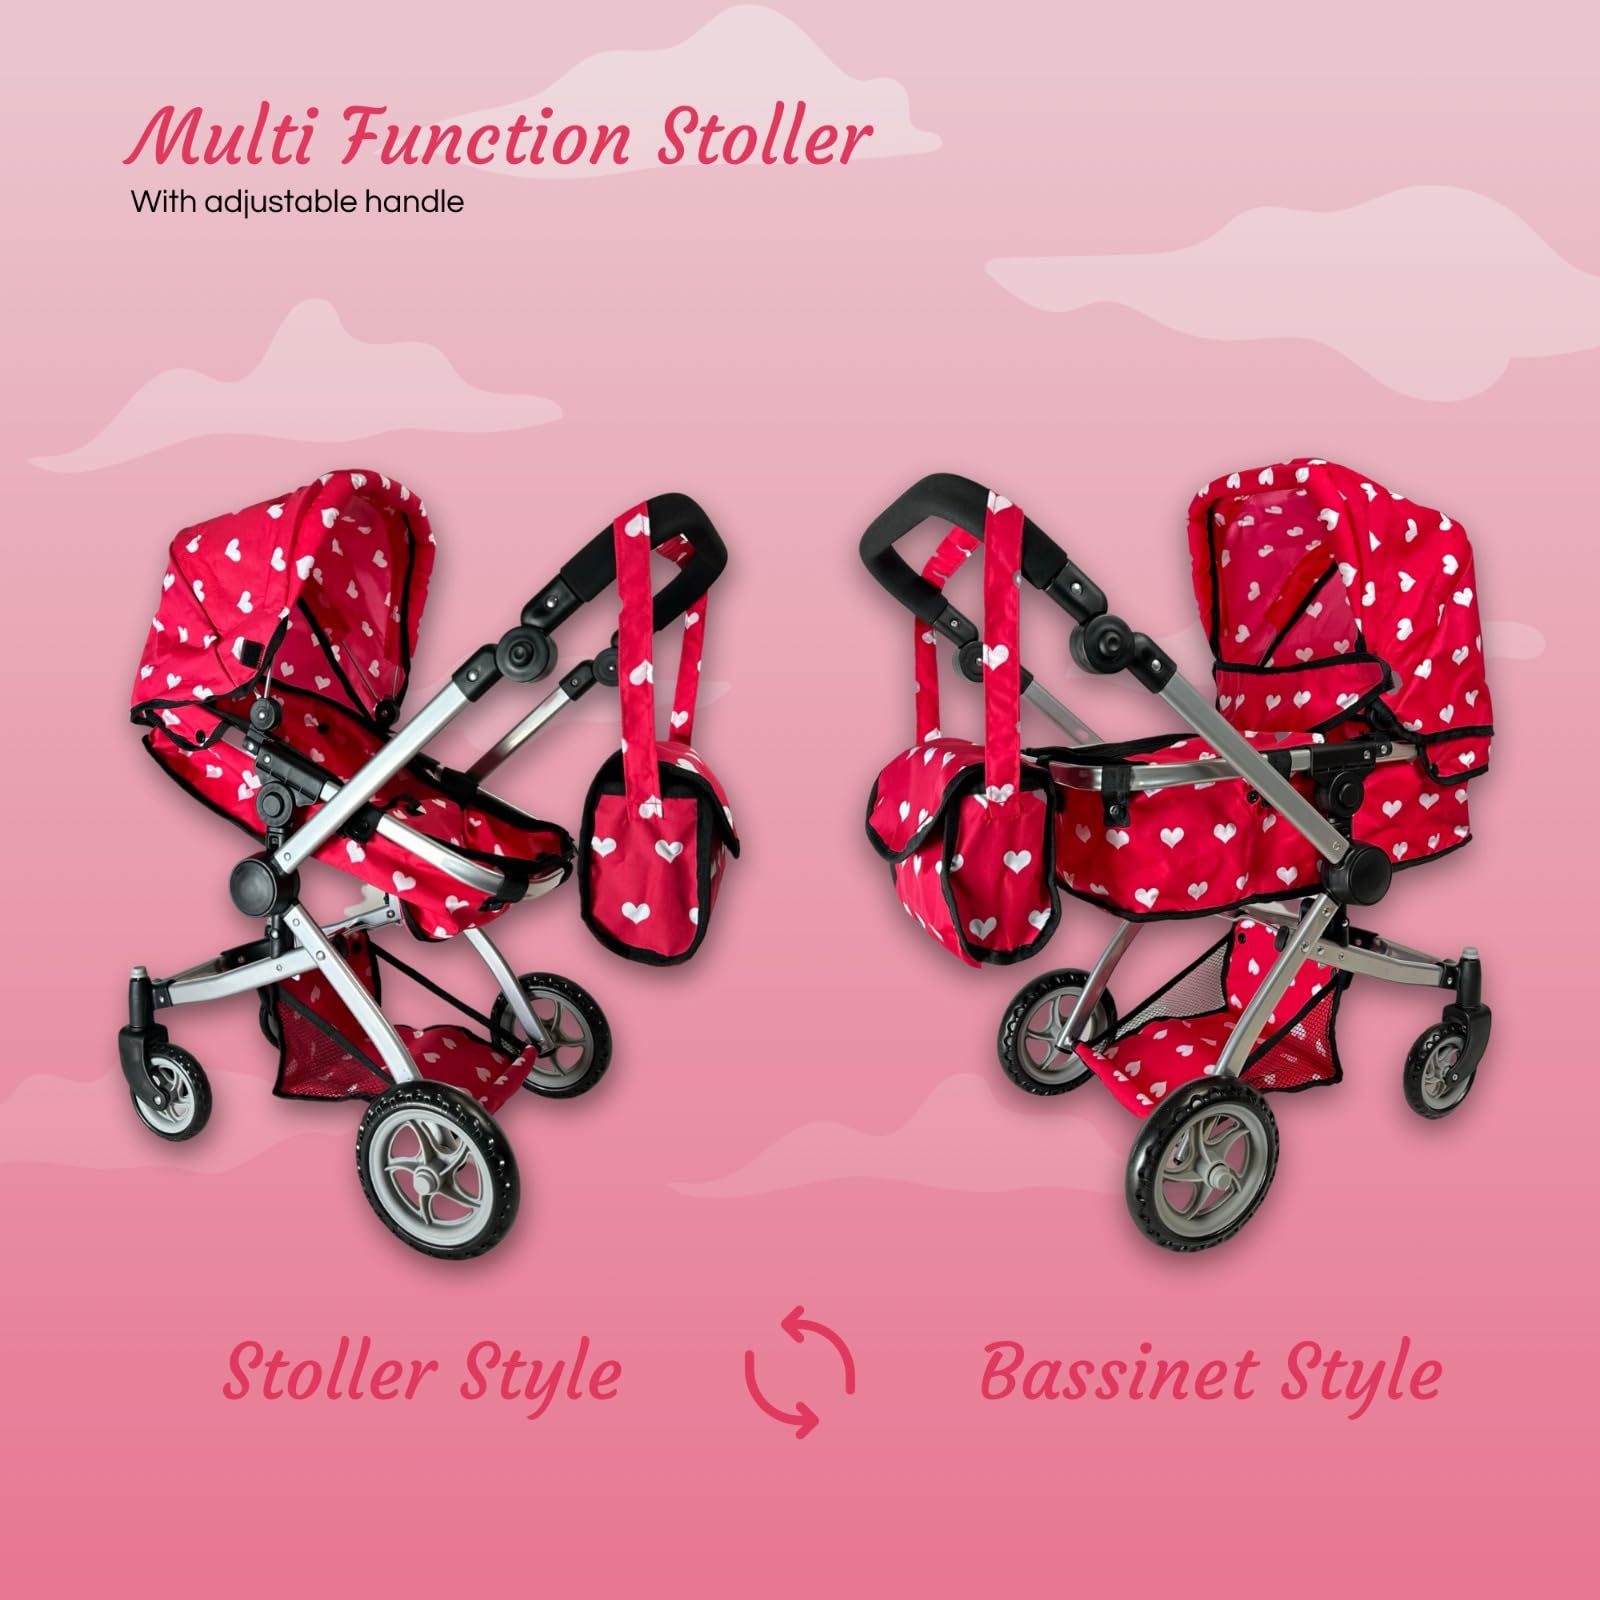 Convertible Combo Baby Doll Stroller for 3 Year Old Girls & Up | Play Toy Baby Stroller for Dolls, Folding Adjustable Bassinet Carriage Buggy with Storage Basket Converts to Sit Up Pushcart Pram